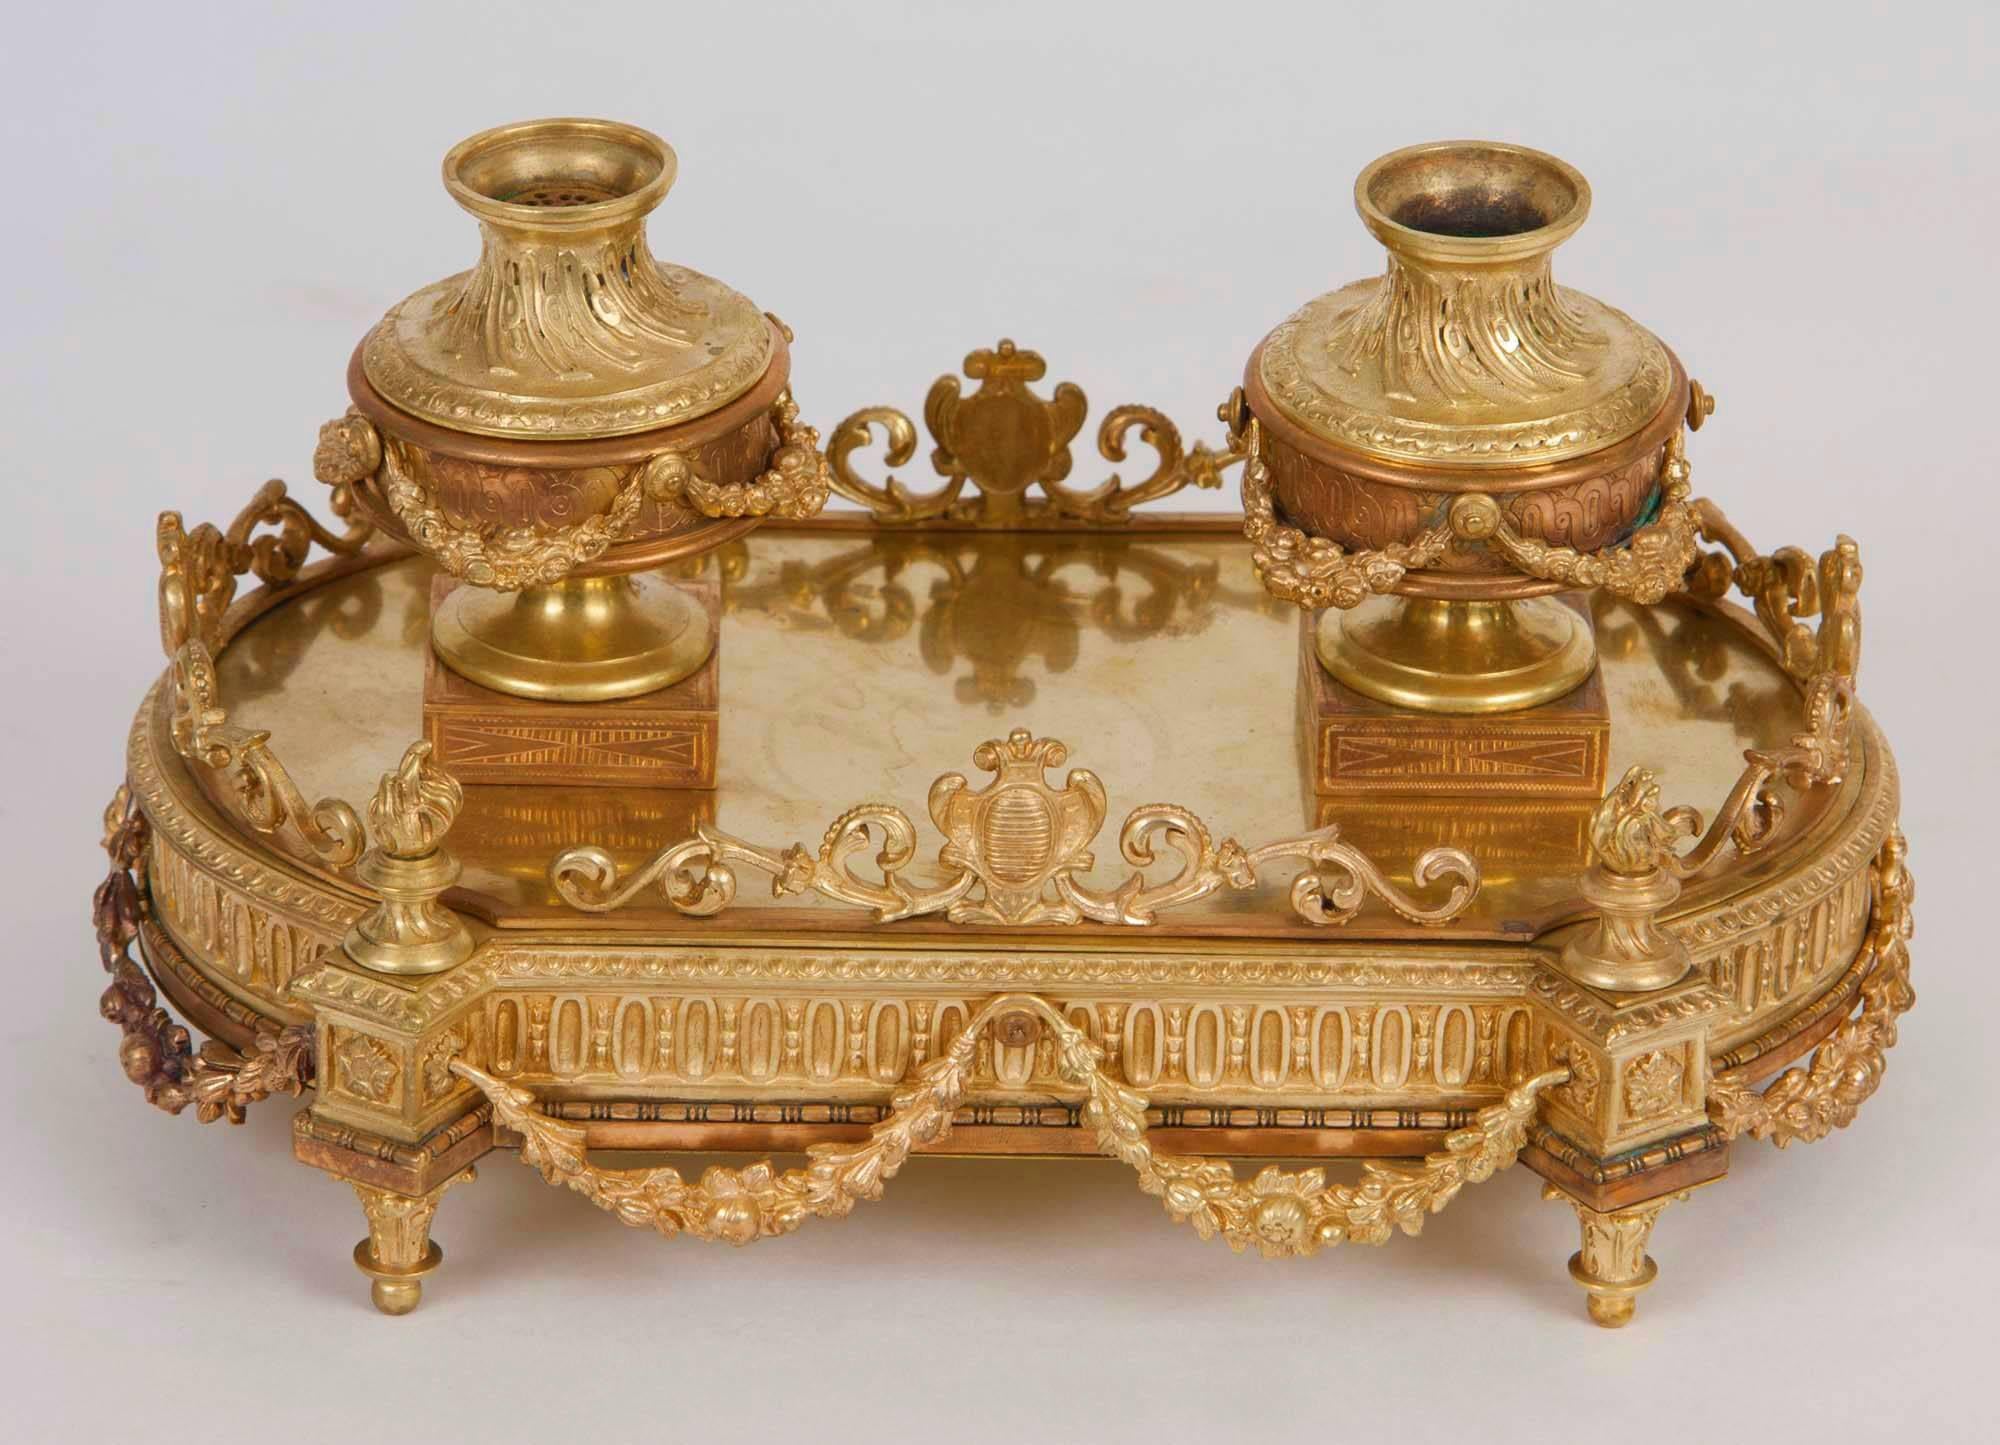 French Louis XVI ornate gilt bronze inkwell with hidden storage compartment.